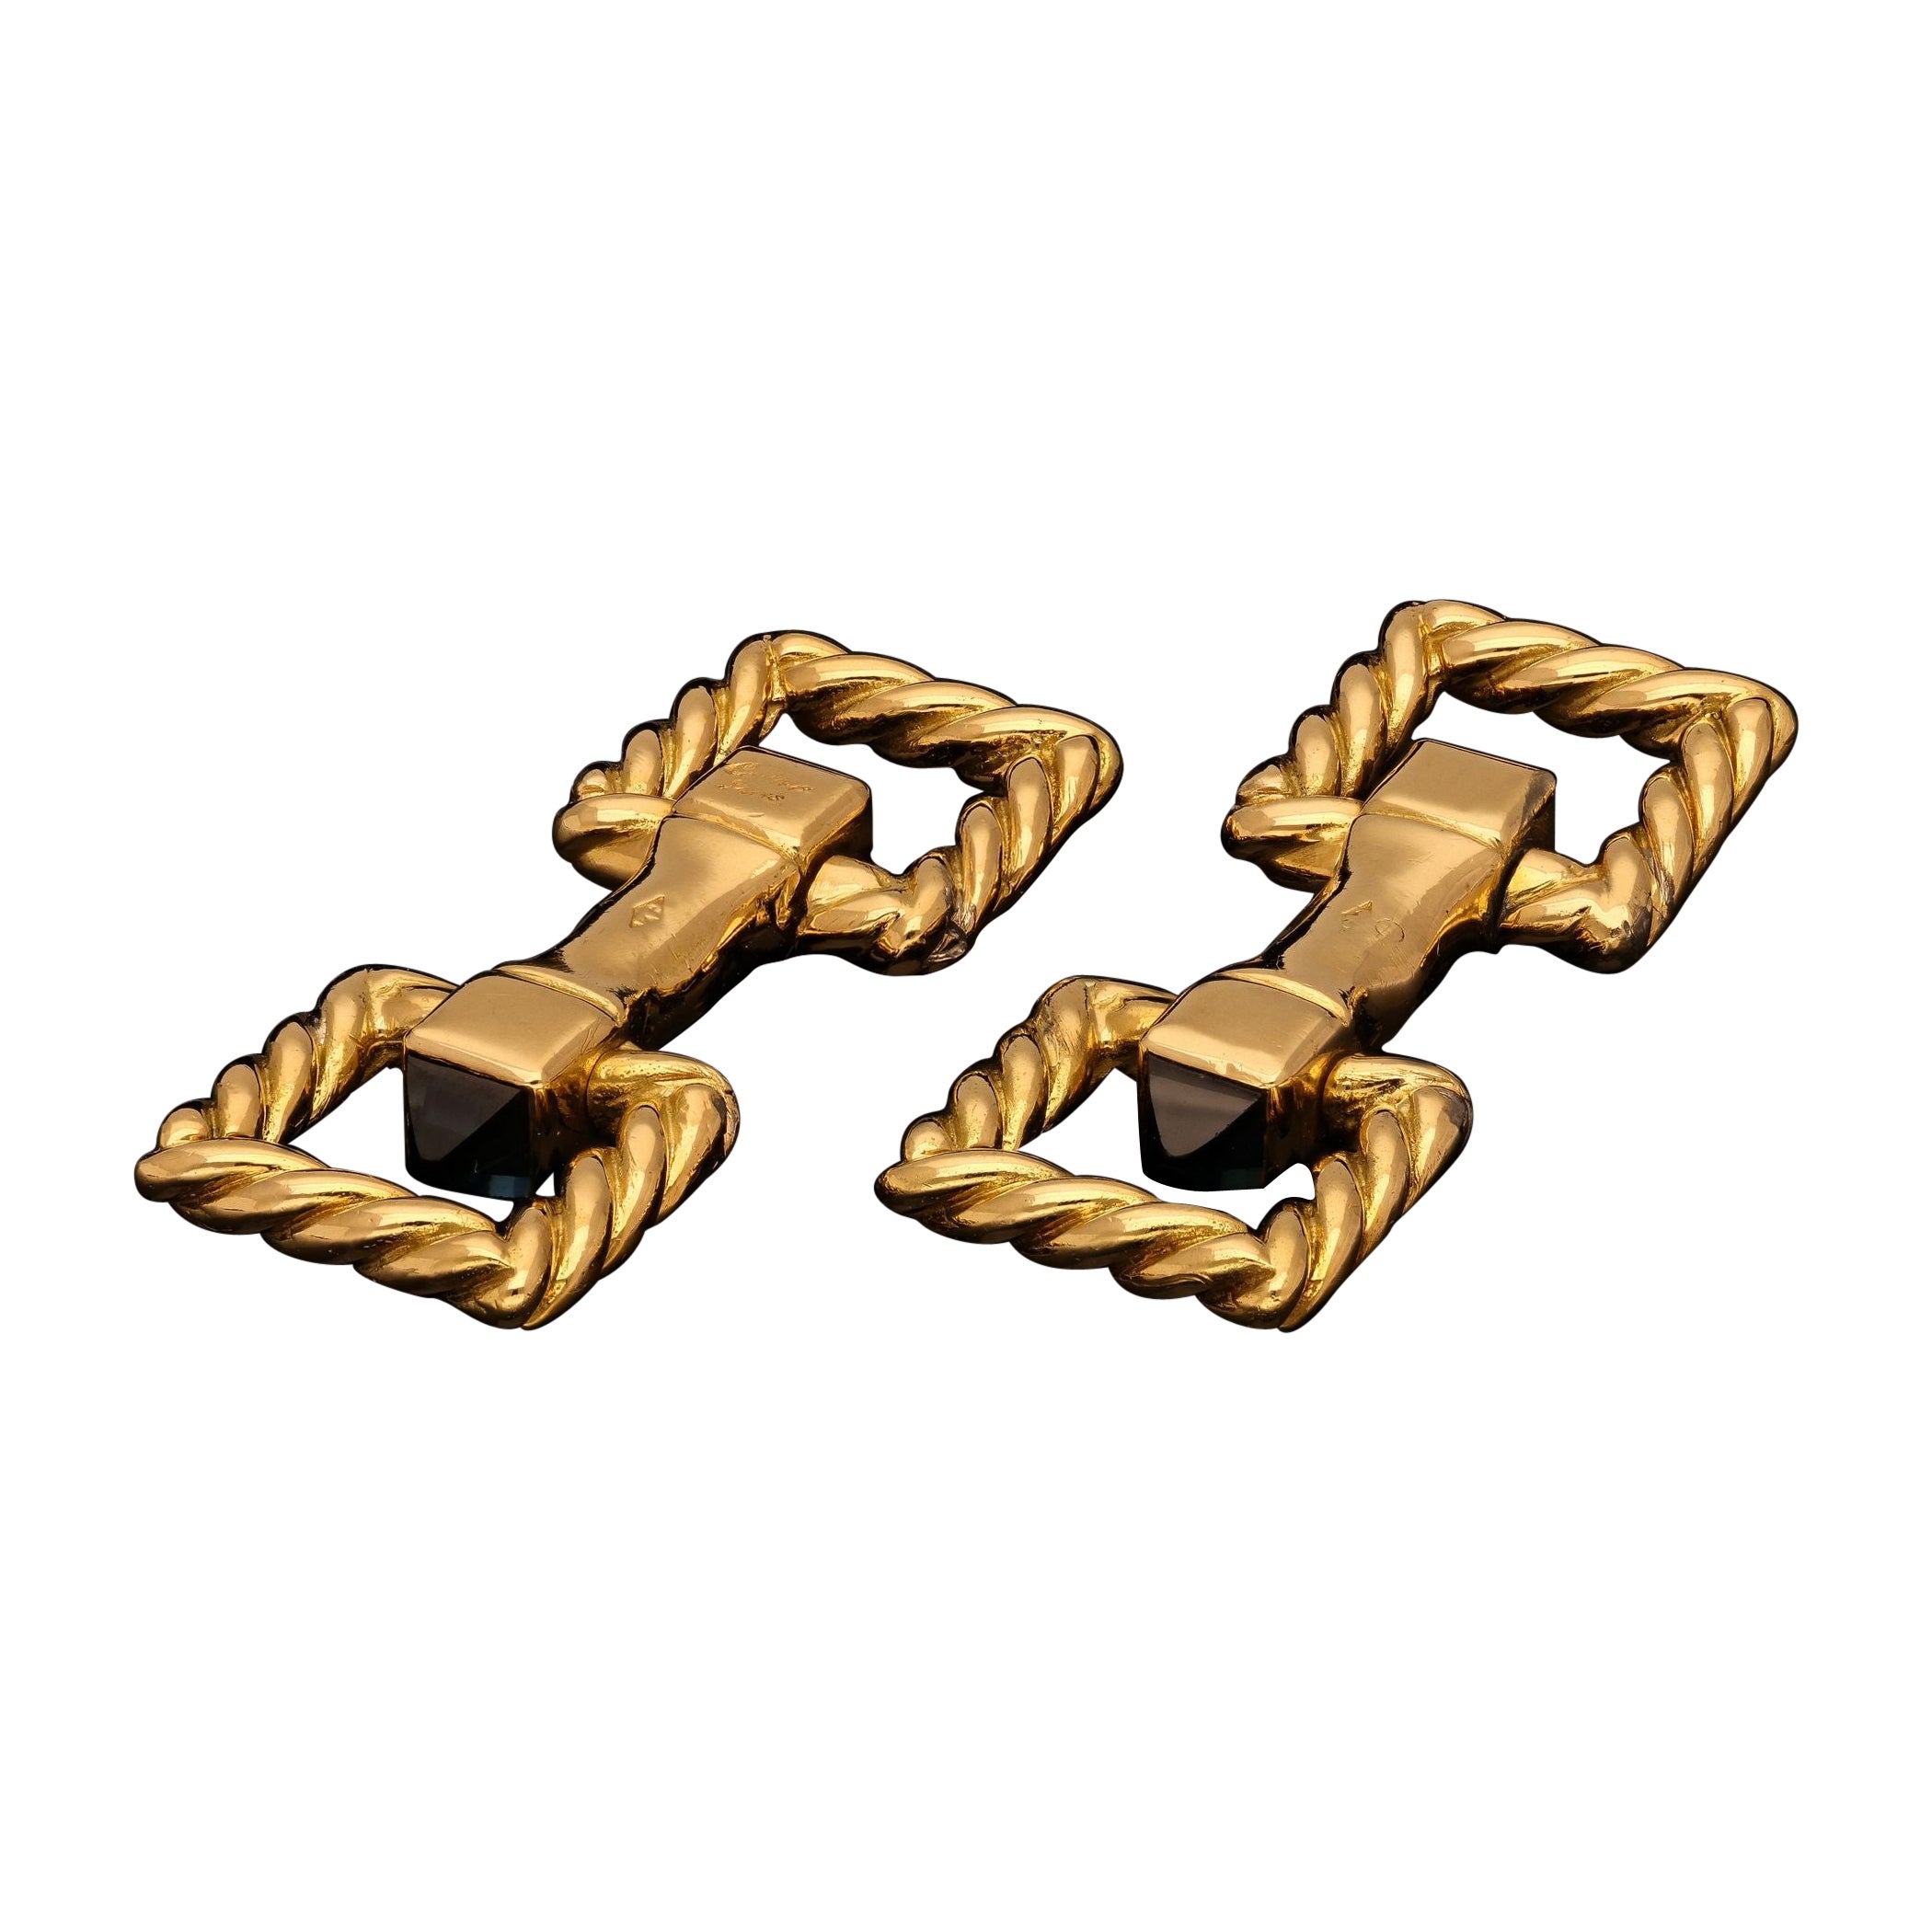 Cartier Stylish Pair of 18ct Gold and Sapphire Cufflinks, circa 1950s